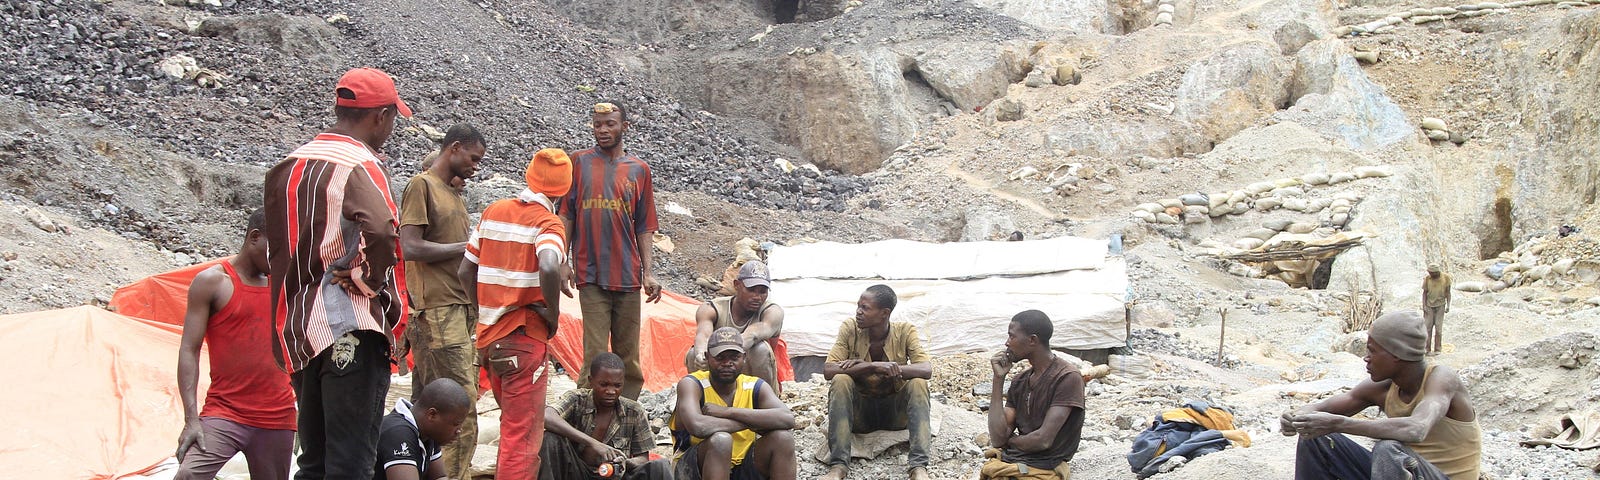 Artisanal miners sit outside a cobalt mine-pit in Tulwizembe, Katanga province, Democratic Republic of Congo, November 25, 2015. Photo by Kenny Katombe/Reuters